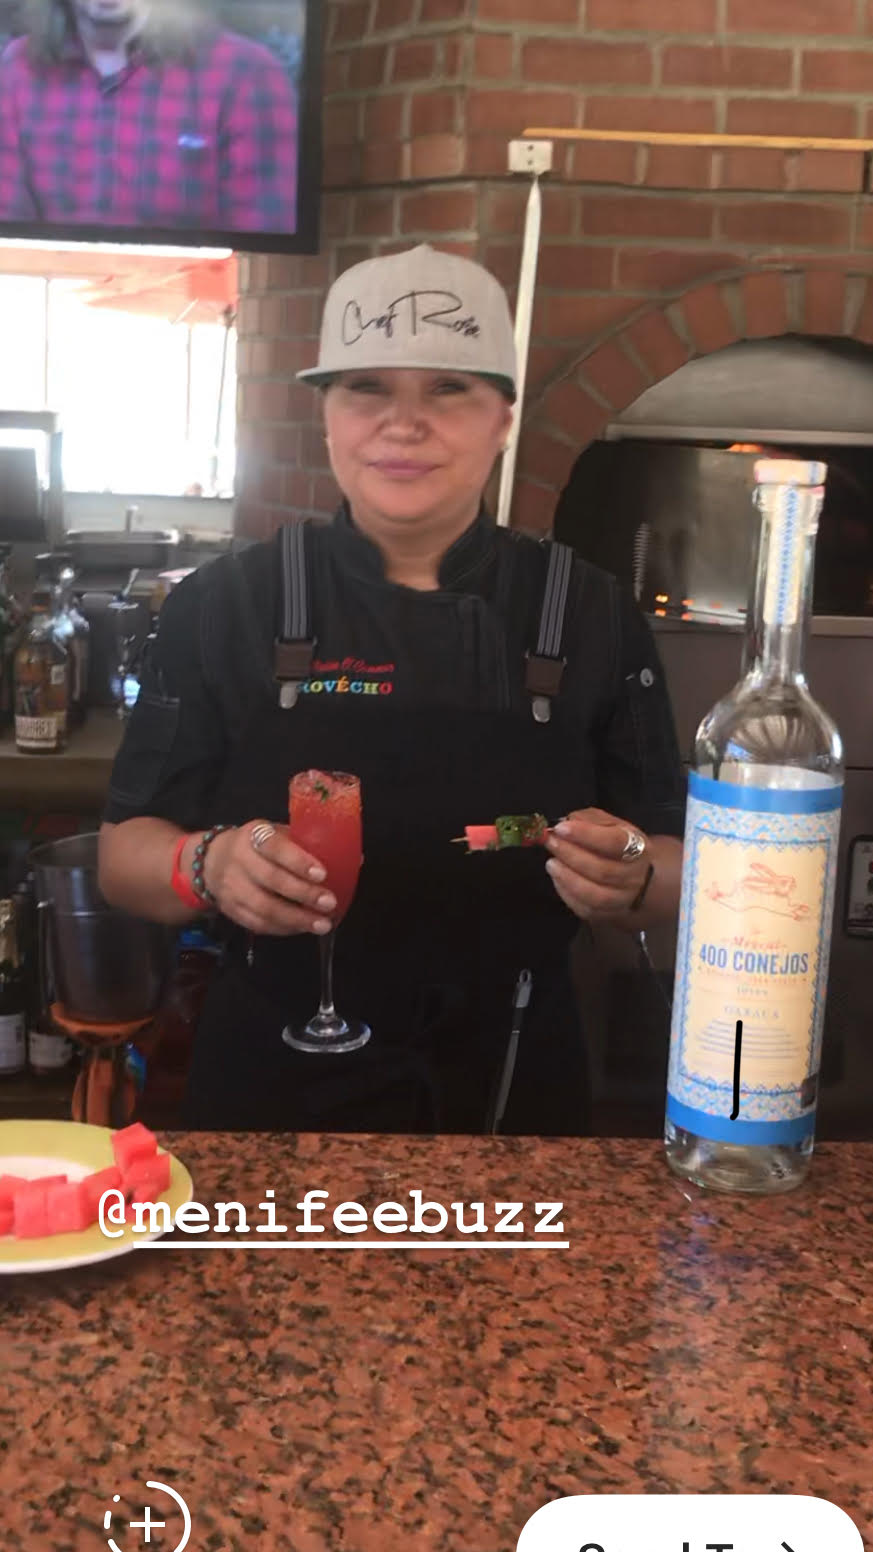 rosie cocktail, chef rosie, provecho grill, mexican inspired recipes, calimex food, calimex restaurant, latina chef